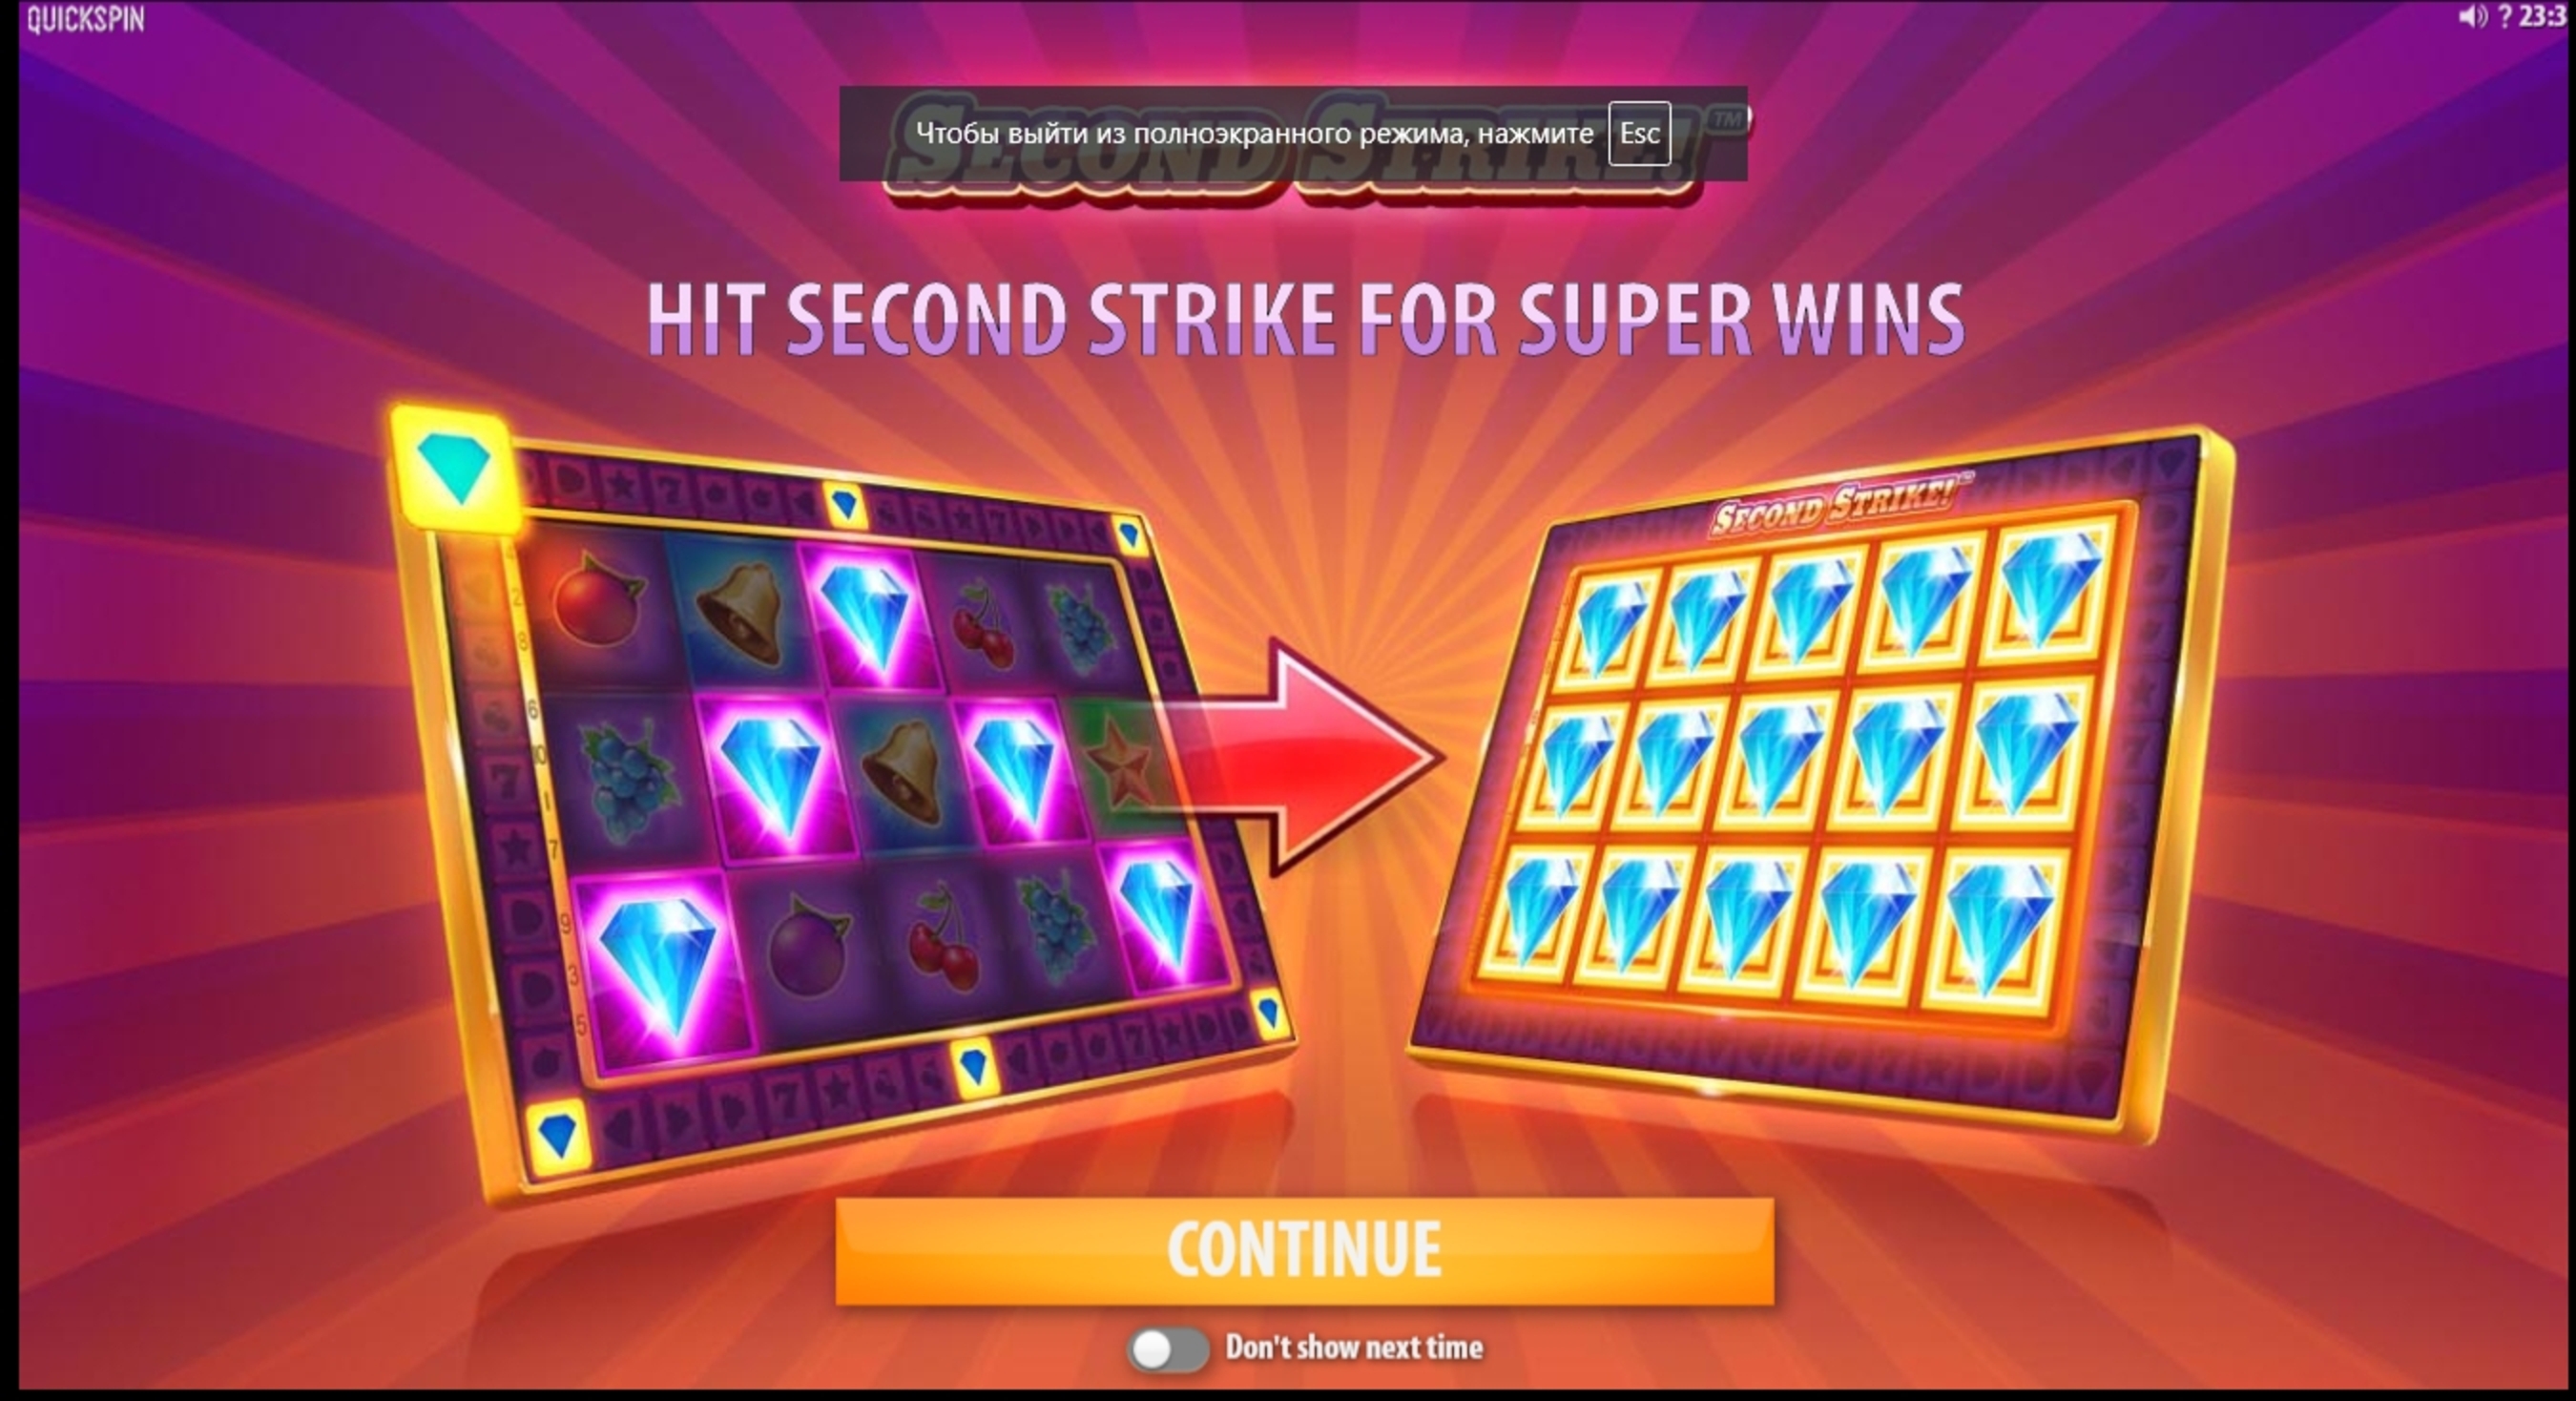 Play Second Strike Free Casino Slot Game by Quickspin